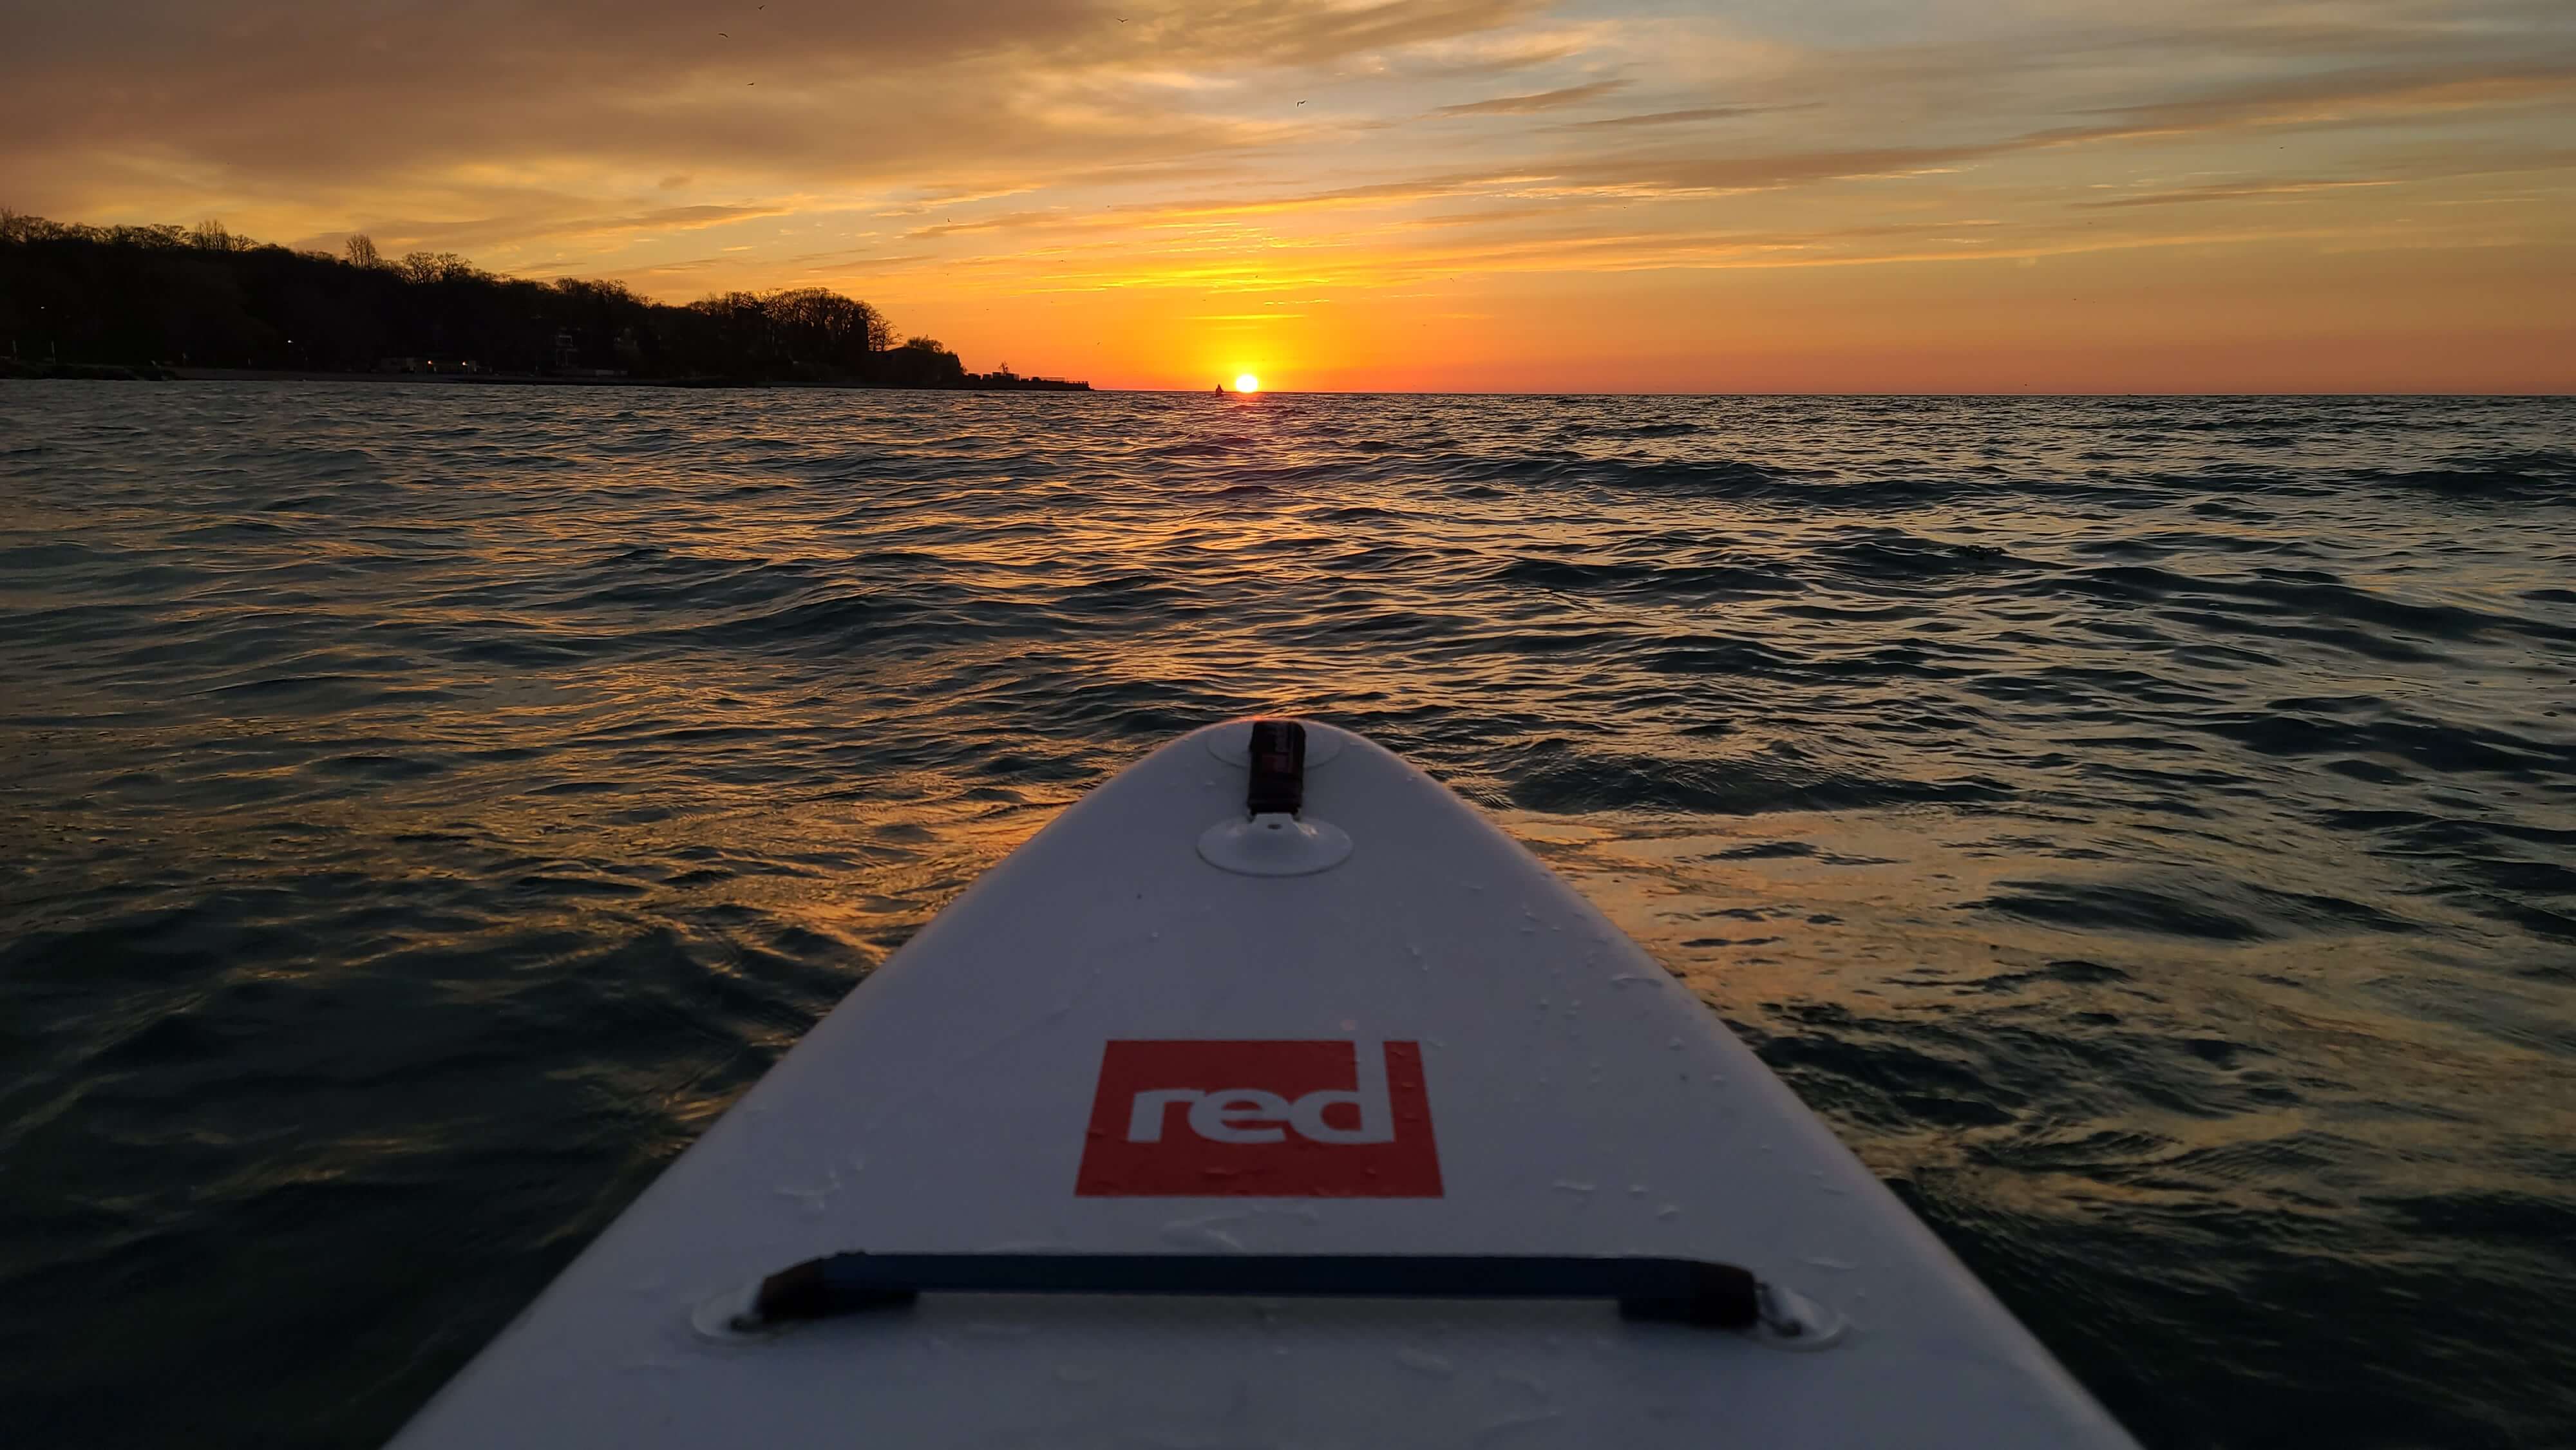 Red Original paddle board on lake in the sunset